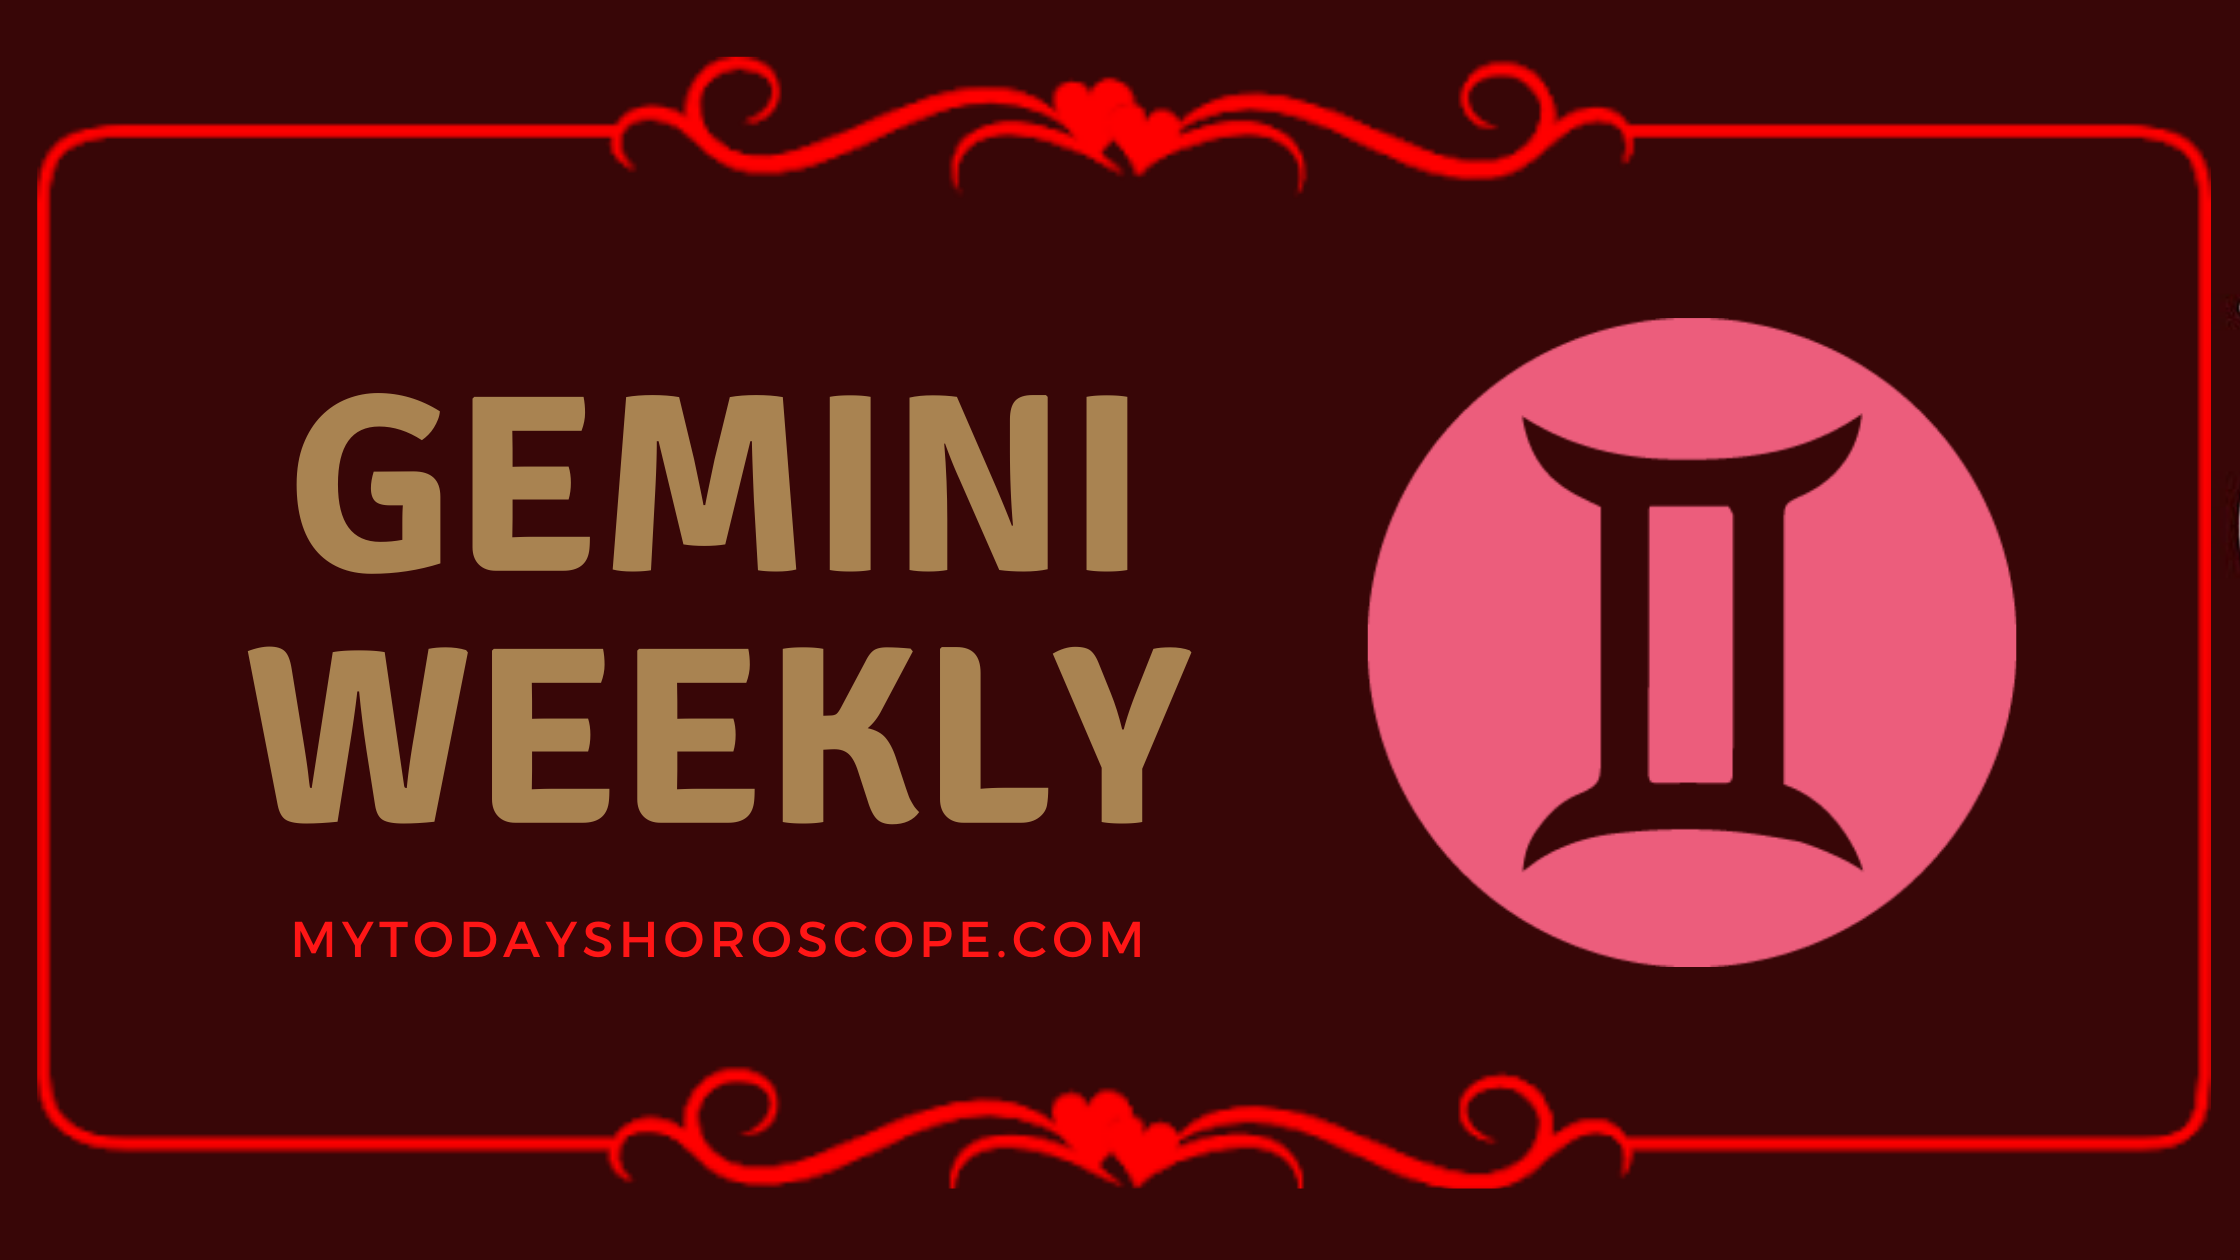 Gemini Weekly Horoscope for Love, Work and Well-being